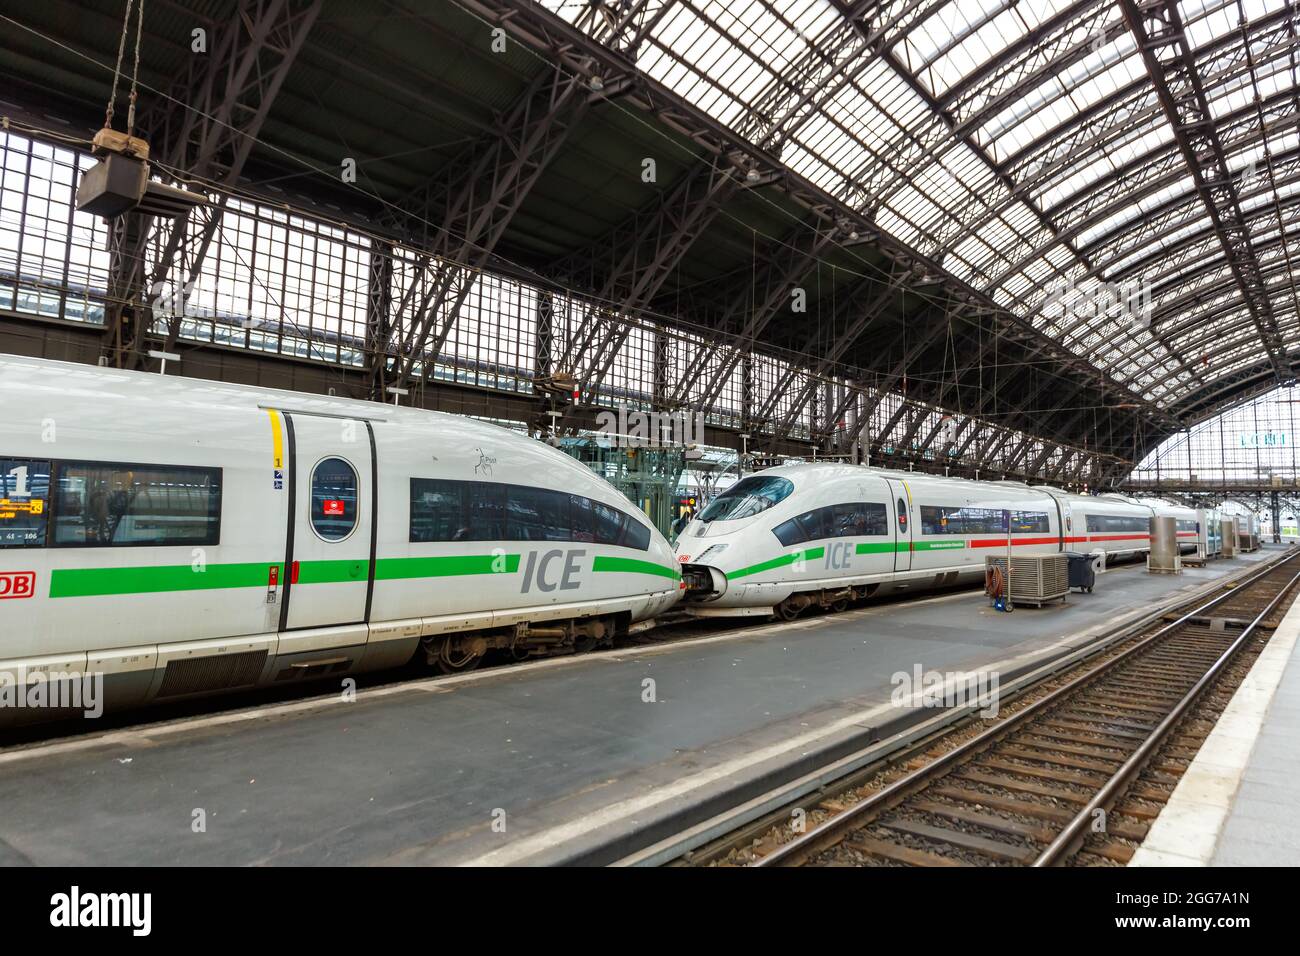 Cologne, Germany - August 3, 2021: ICE 3 high-speed train at Cologne Köln main railway station Hauptbahnhof Hbf in Germany. Stock Photo